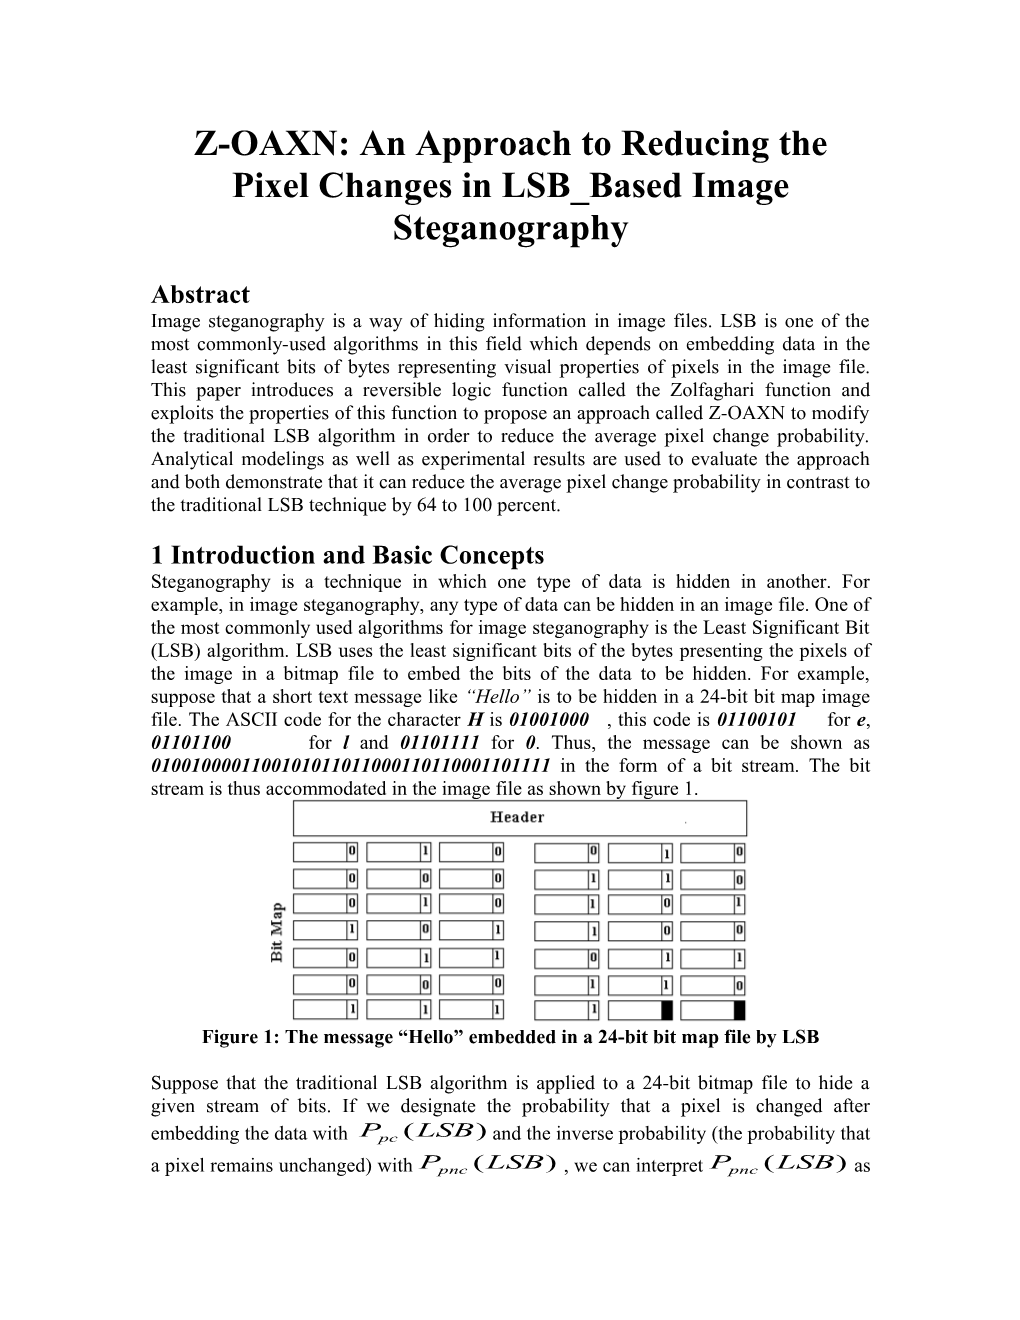 Z-OAX: an Approach to Decreasing Pixel Changes Using Reversible Functions in LSB Based